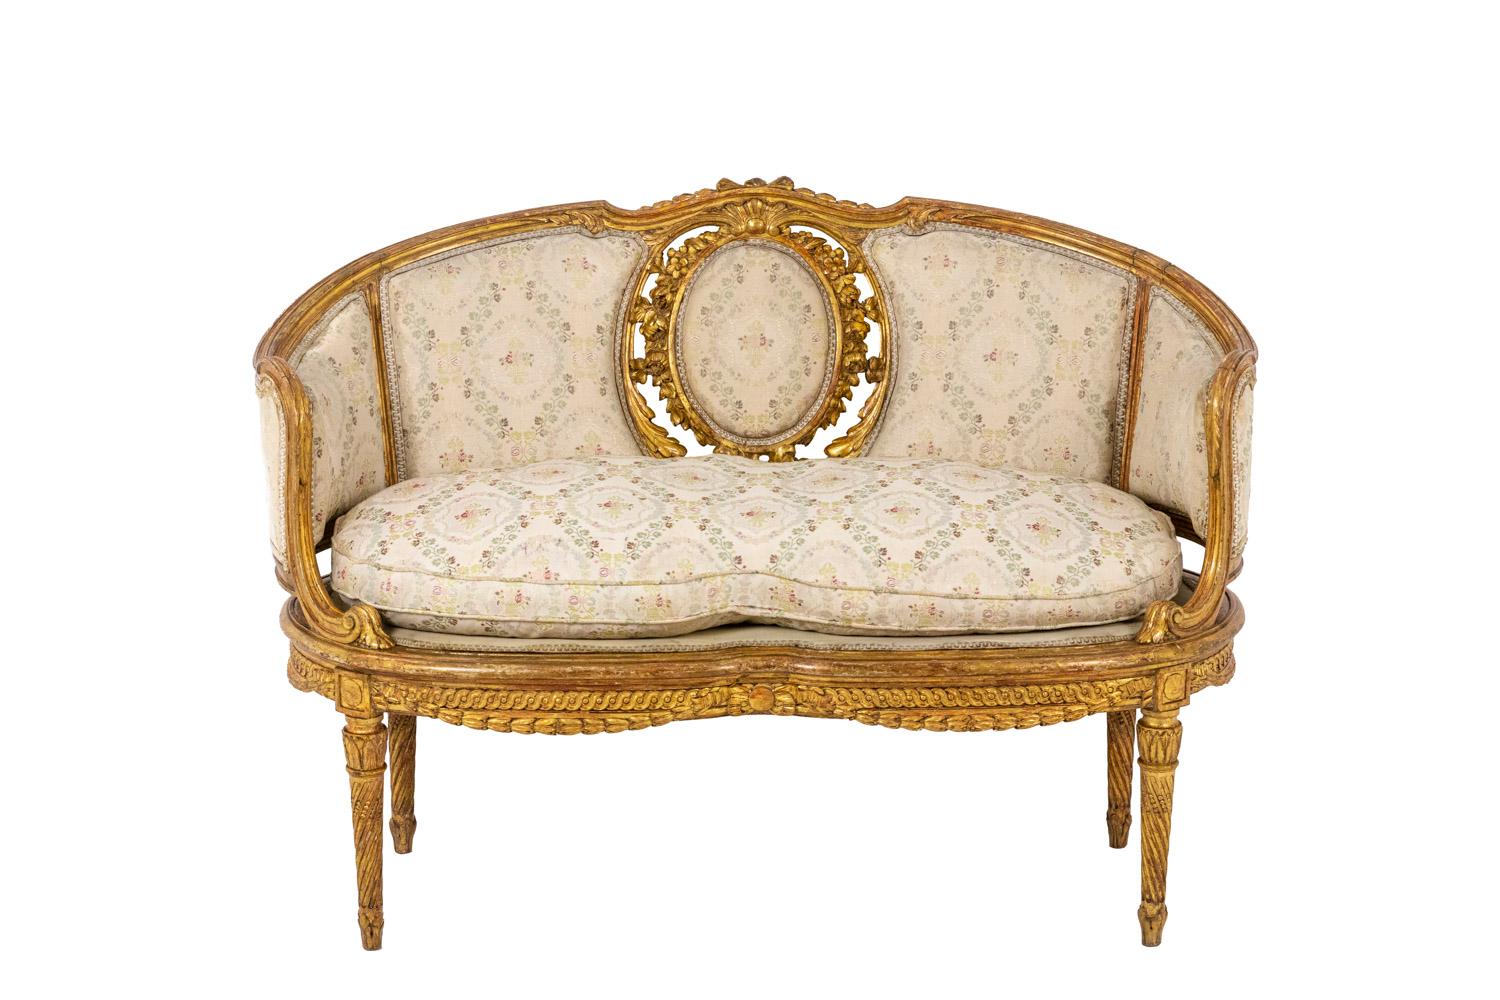 Transition style two places sofa in molded and gilt wood standing on four straight tapered and fluted legs. The belt is adorned with garlands and a frieze of droplets. Arm supports slightly behind the leg line. Armrests with ears. Curved back with a